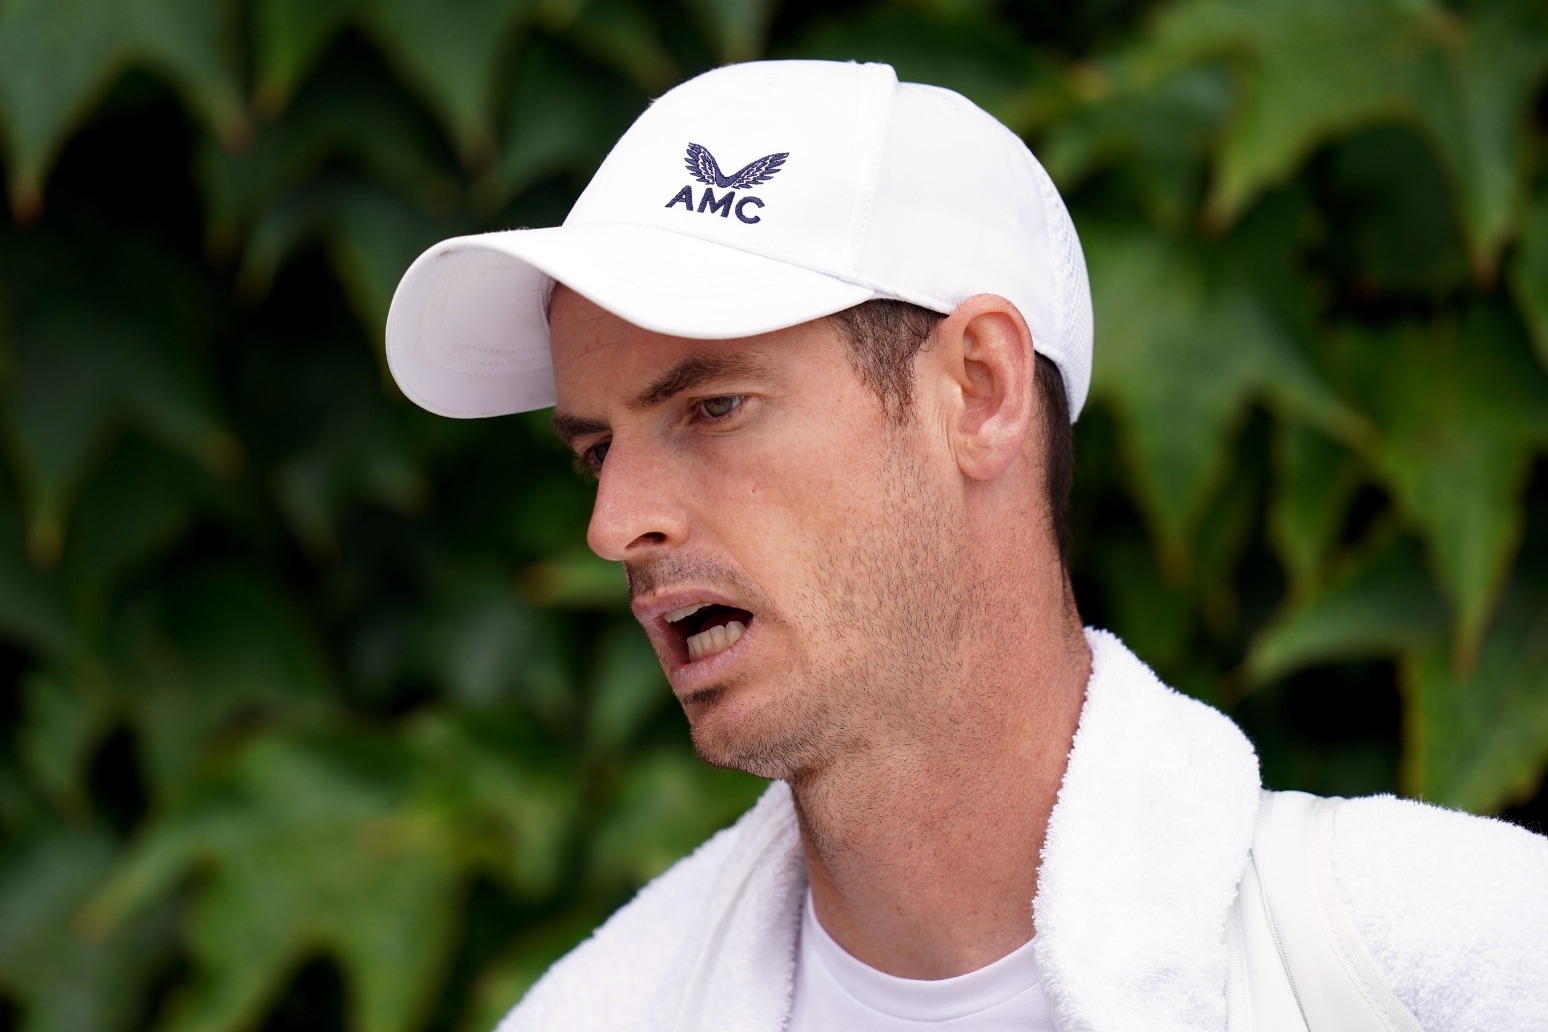 Andy Murray knocked out in first round of Citi Open against Mikael Ymer 